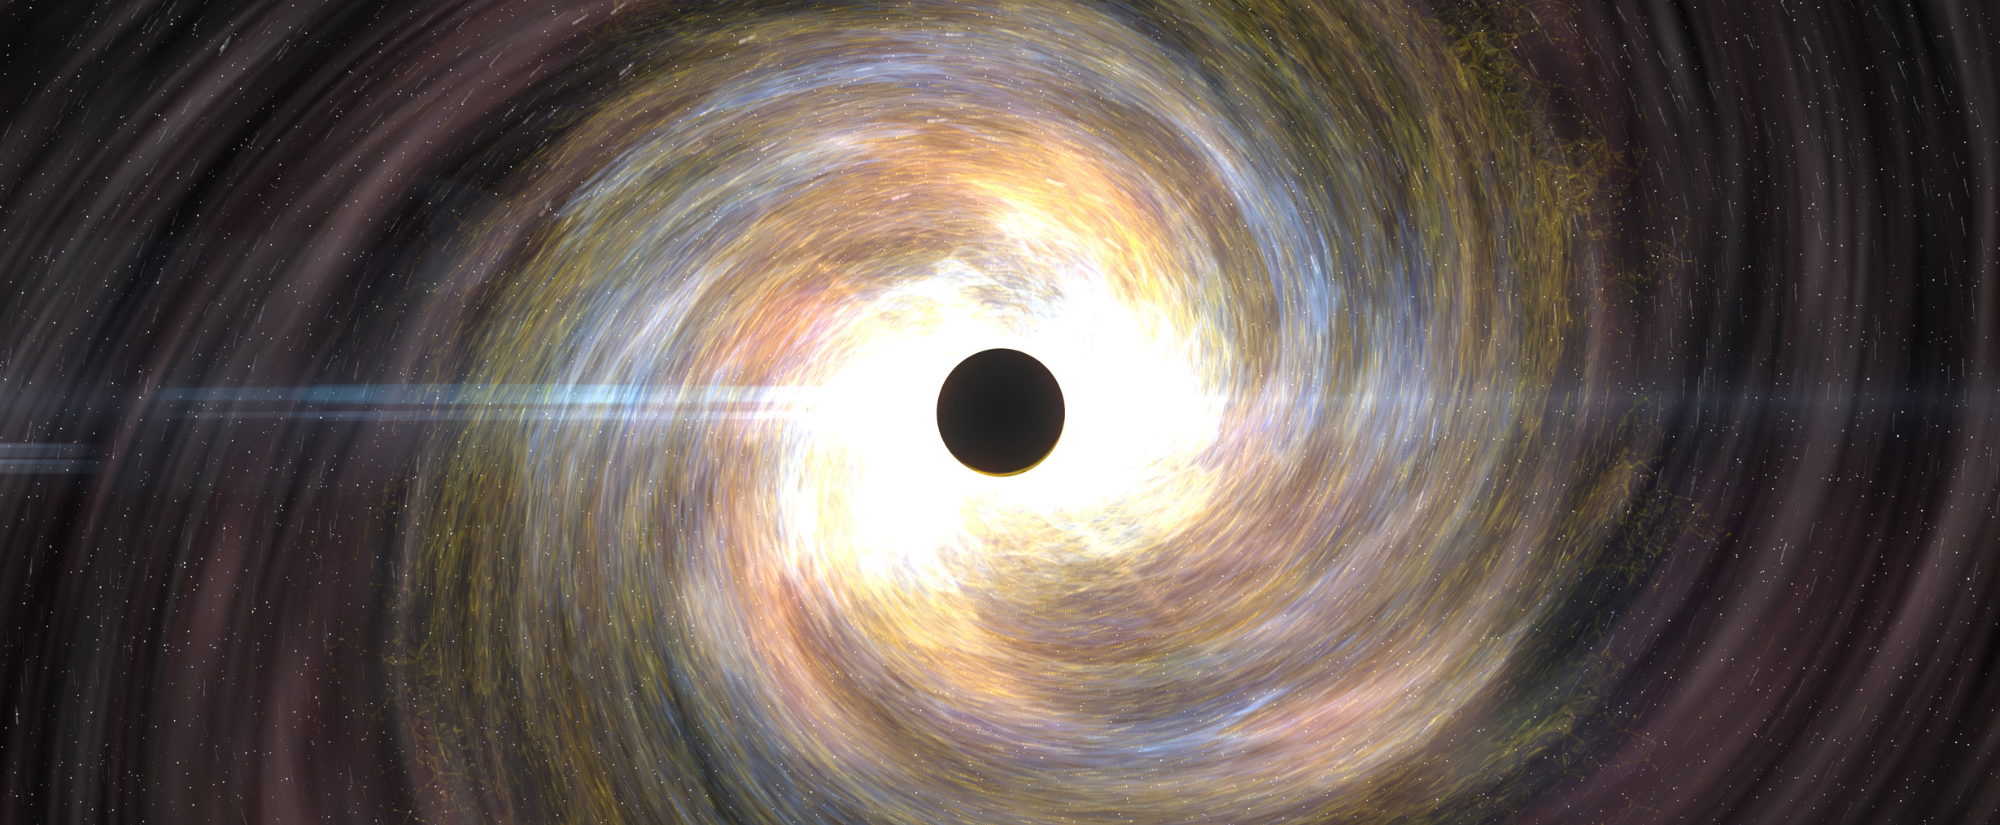 0-Billion-Year Journey of a Star to a Black Hole